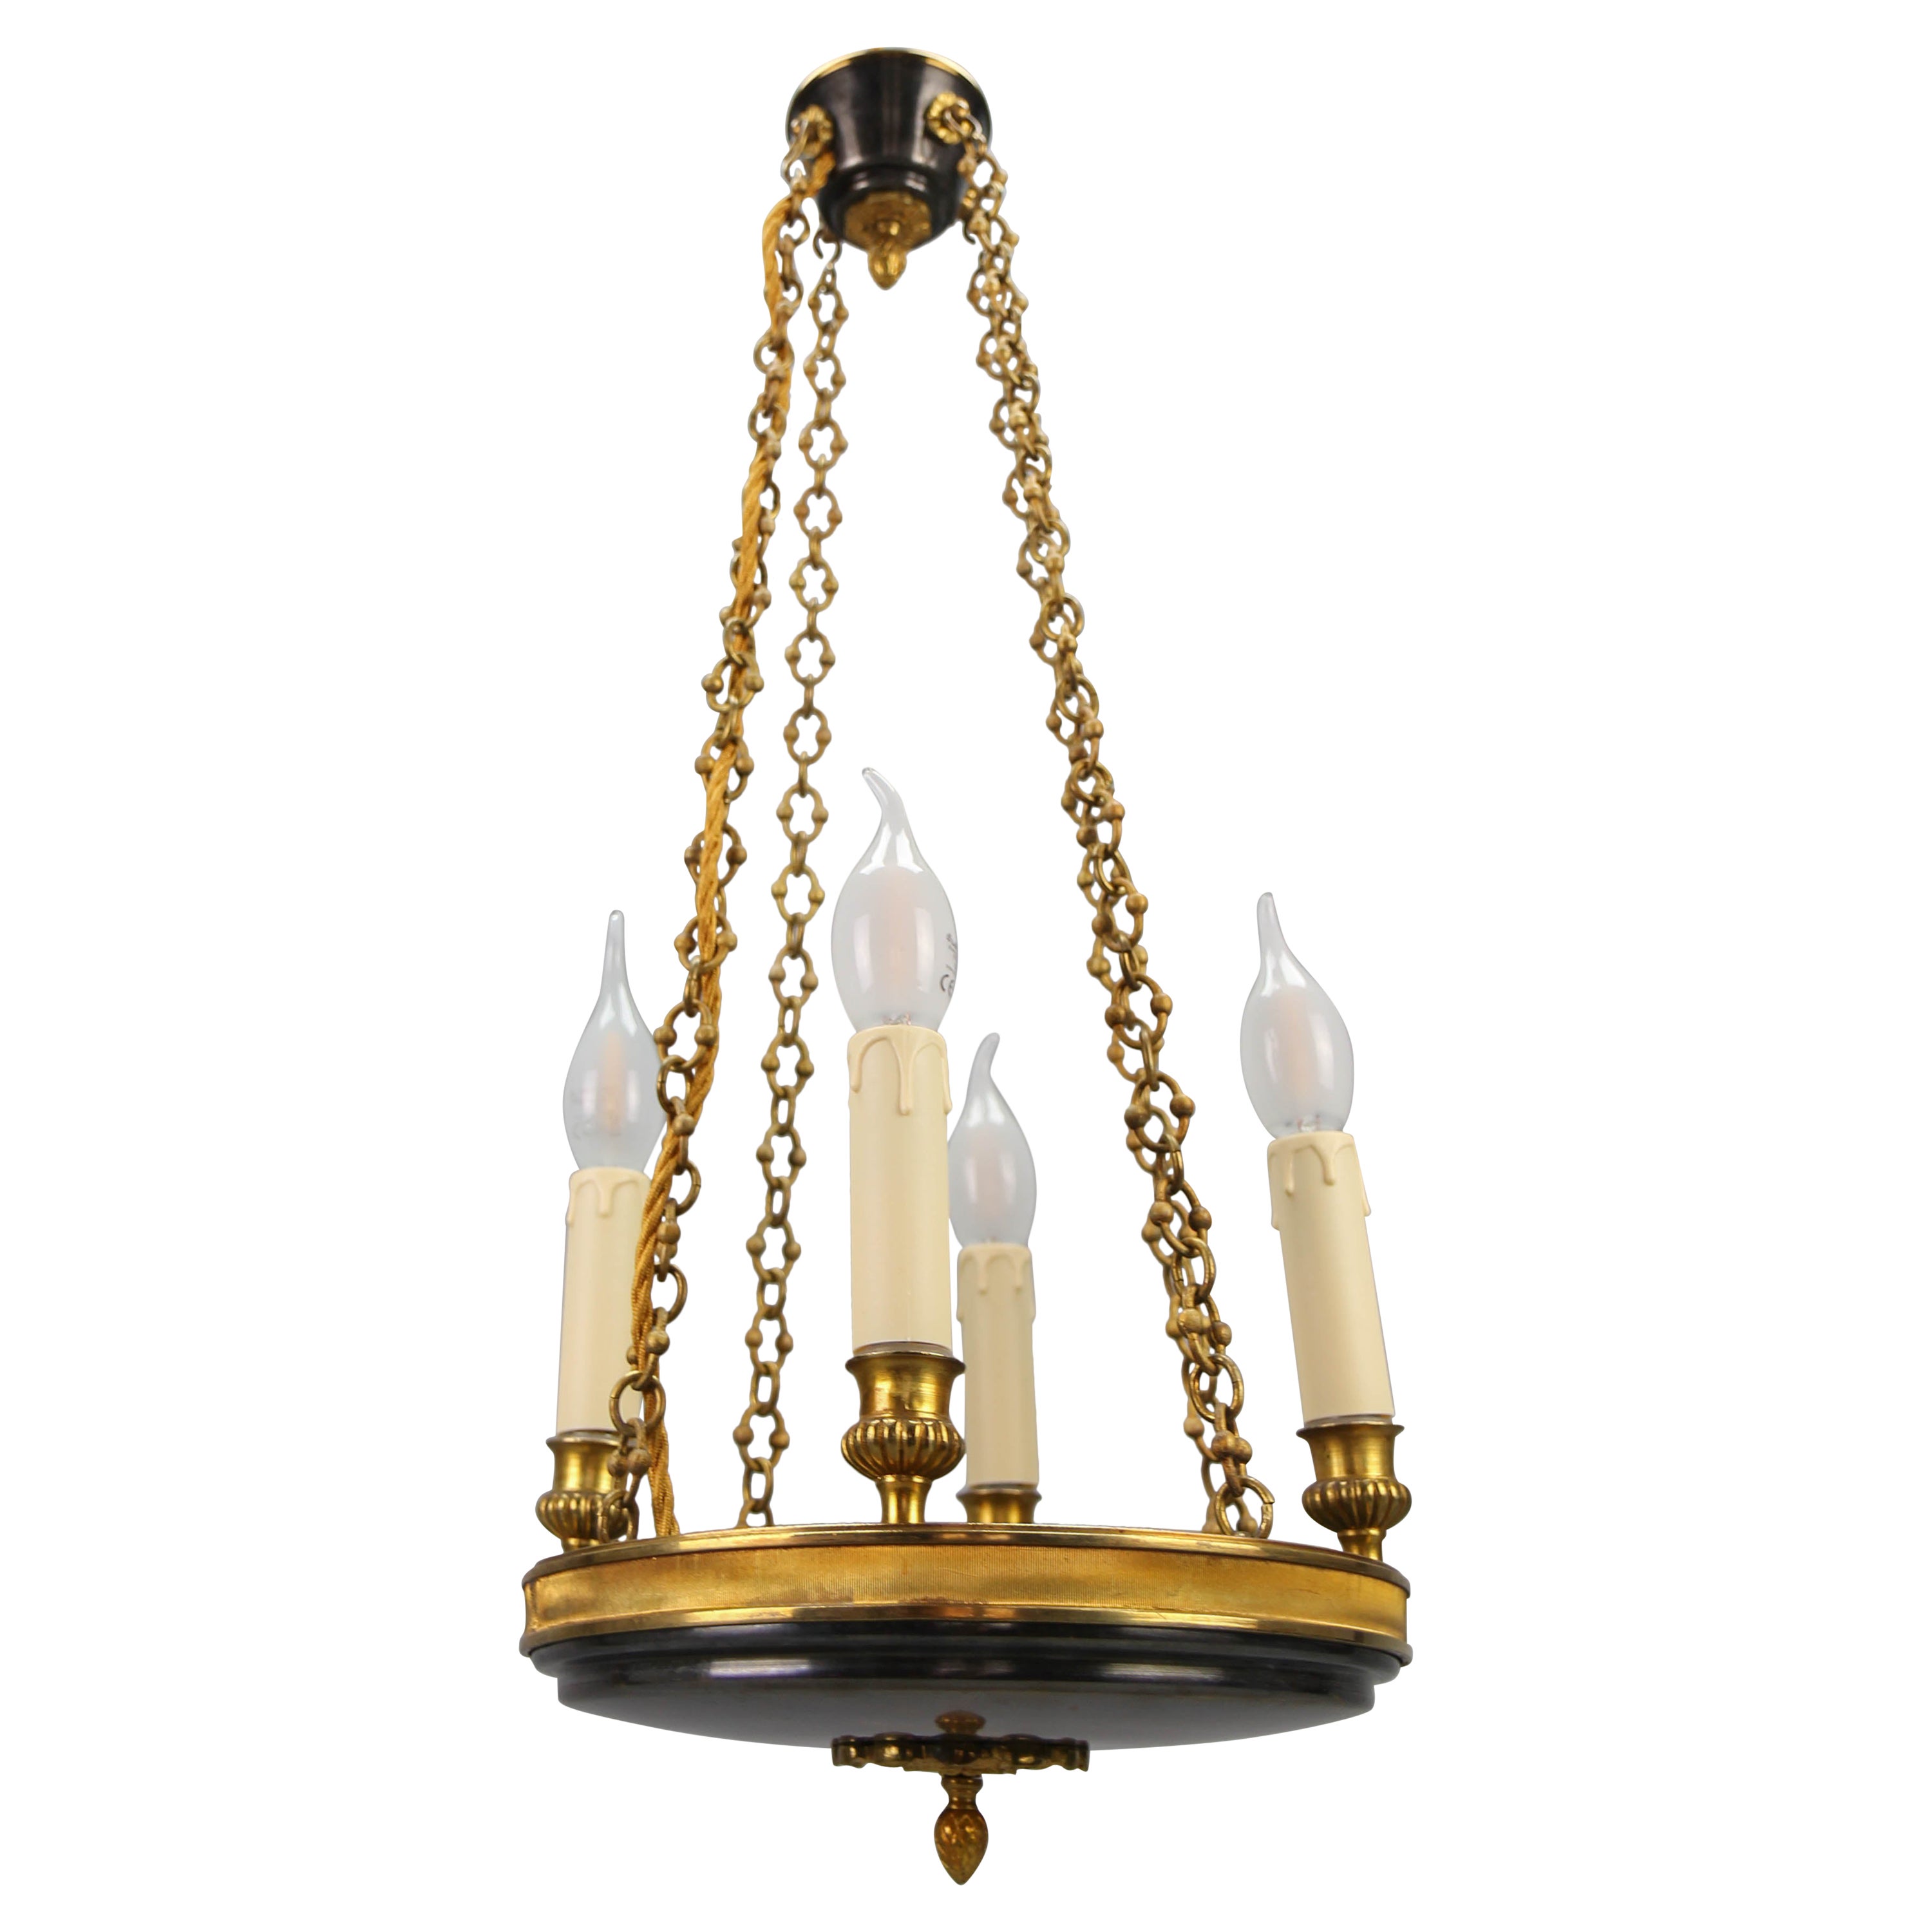 Early 20th Century French Empire Style Gilt Bronze Four-Light Chandelier